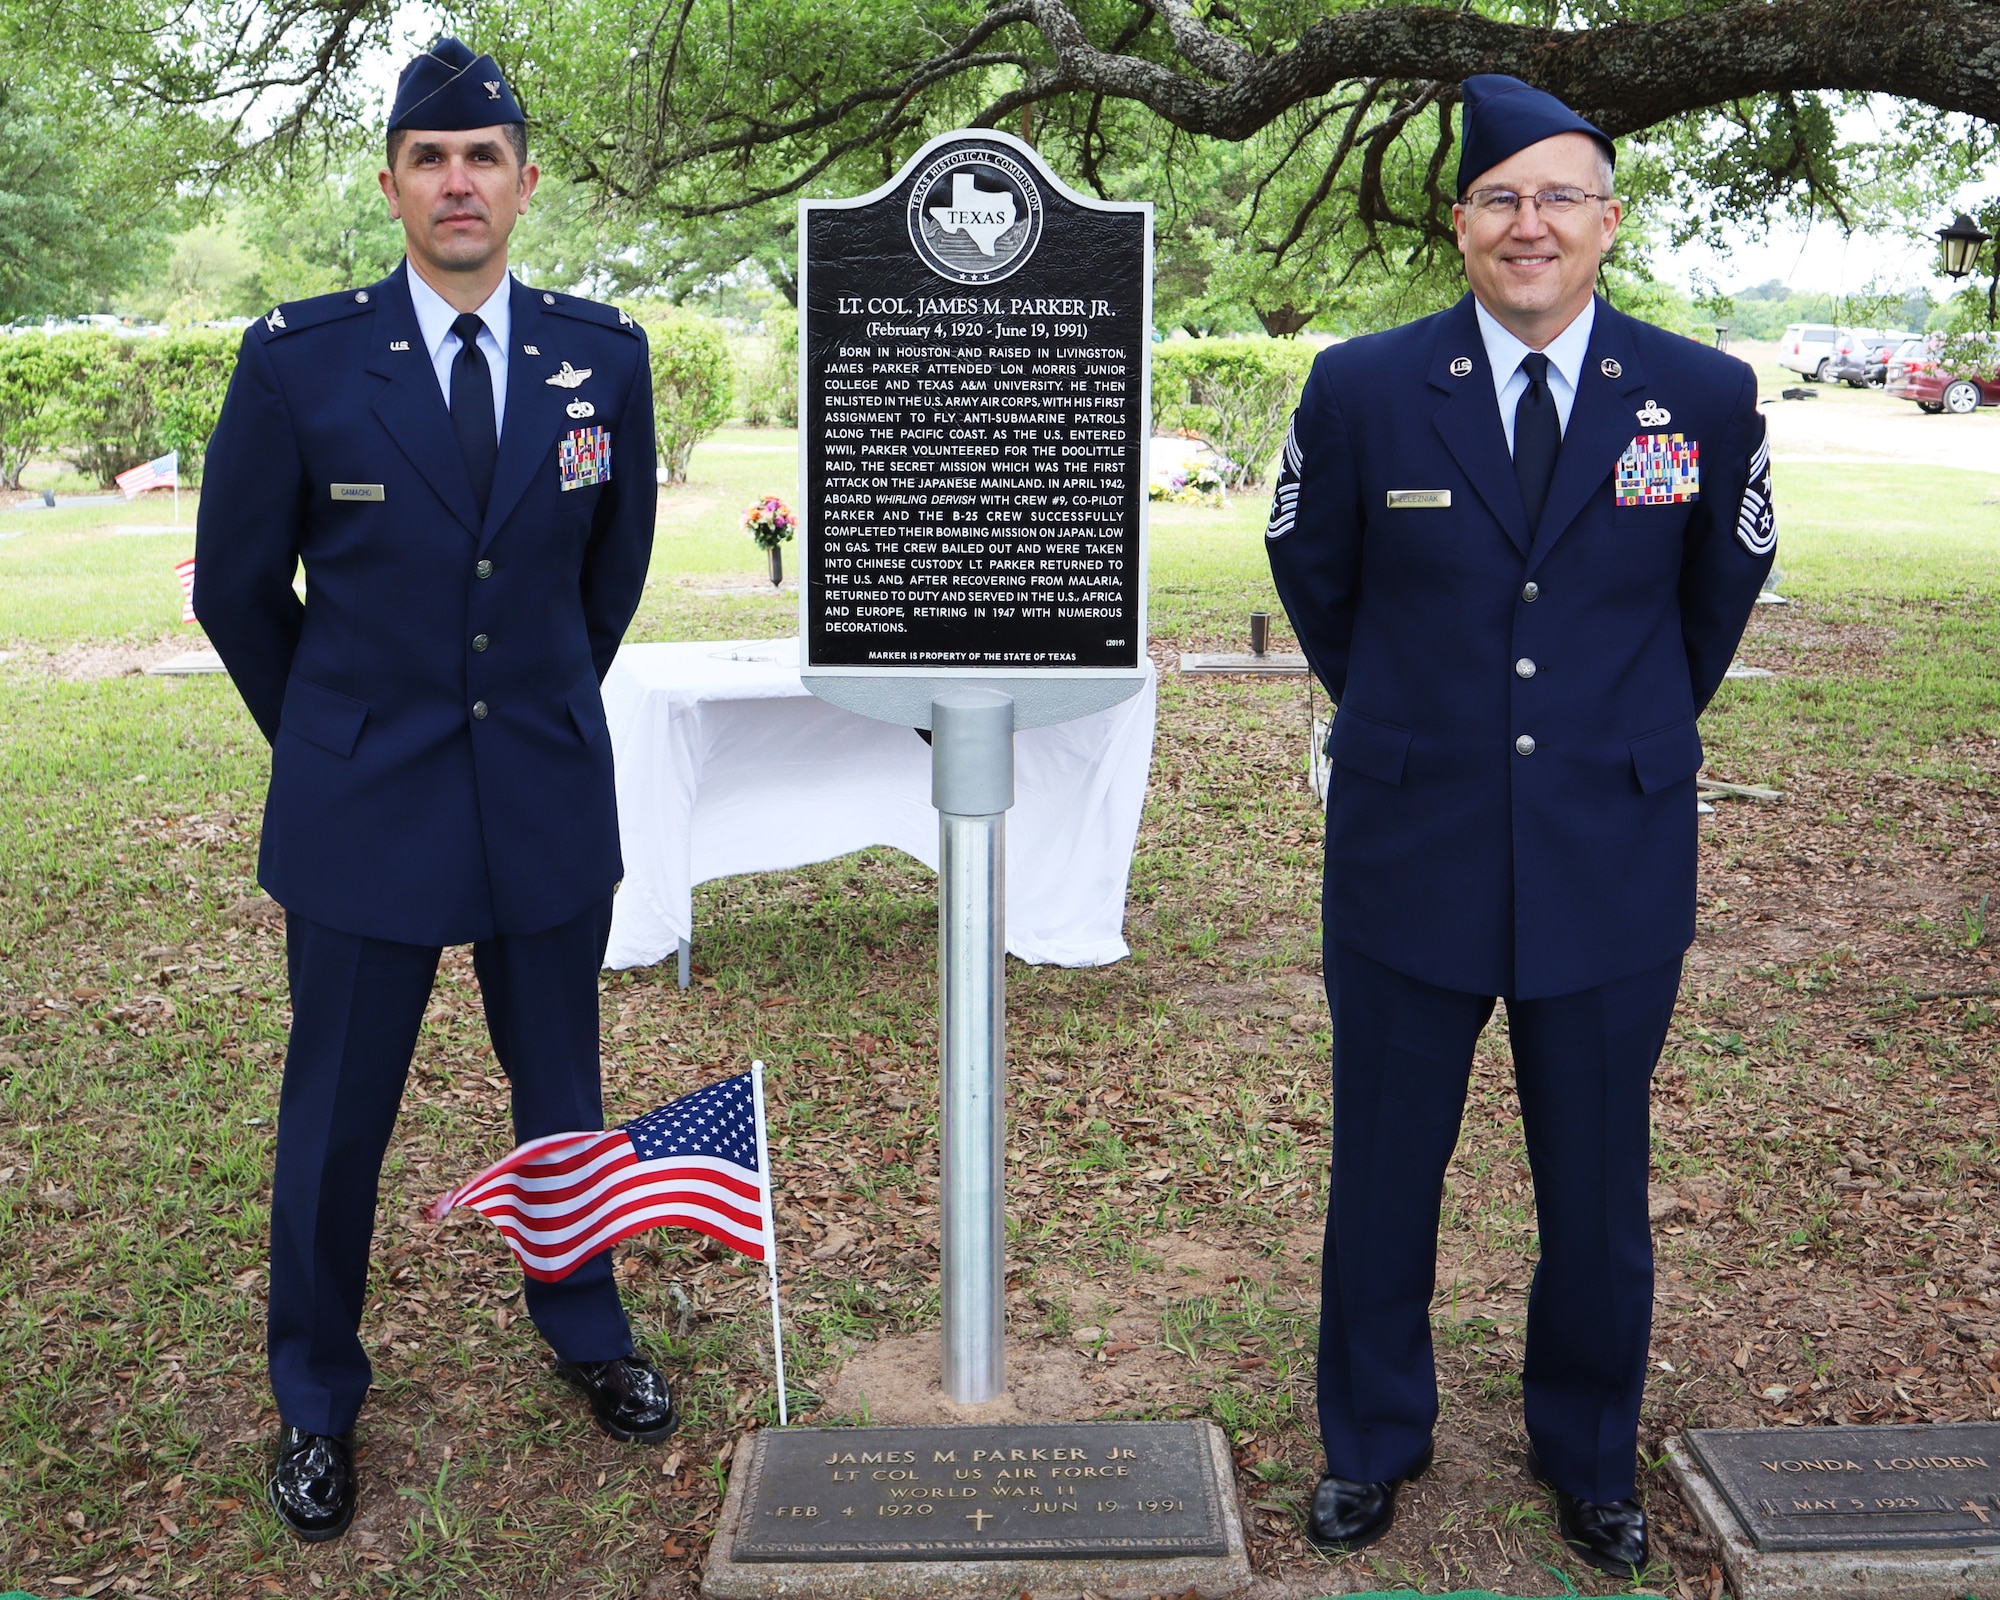 Col Andrew Camacho, 147th Attack Wing Commander, and Chief Master Sgt. Walter Zelezniak, 147th Attack Wing Command Chief, participate in an event honoring Lt. Col James M. Parker, Jr., a WWII veteran who is laid to rest in Livingston, TX, April 17, 2021